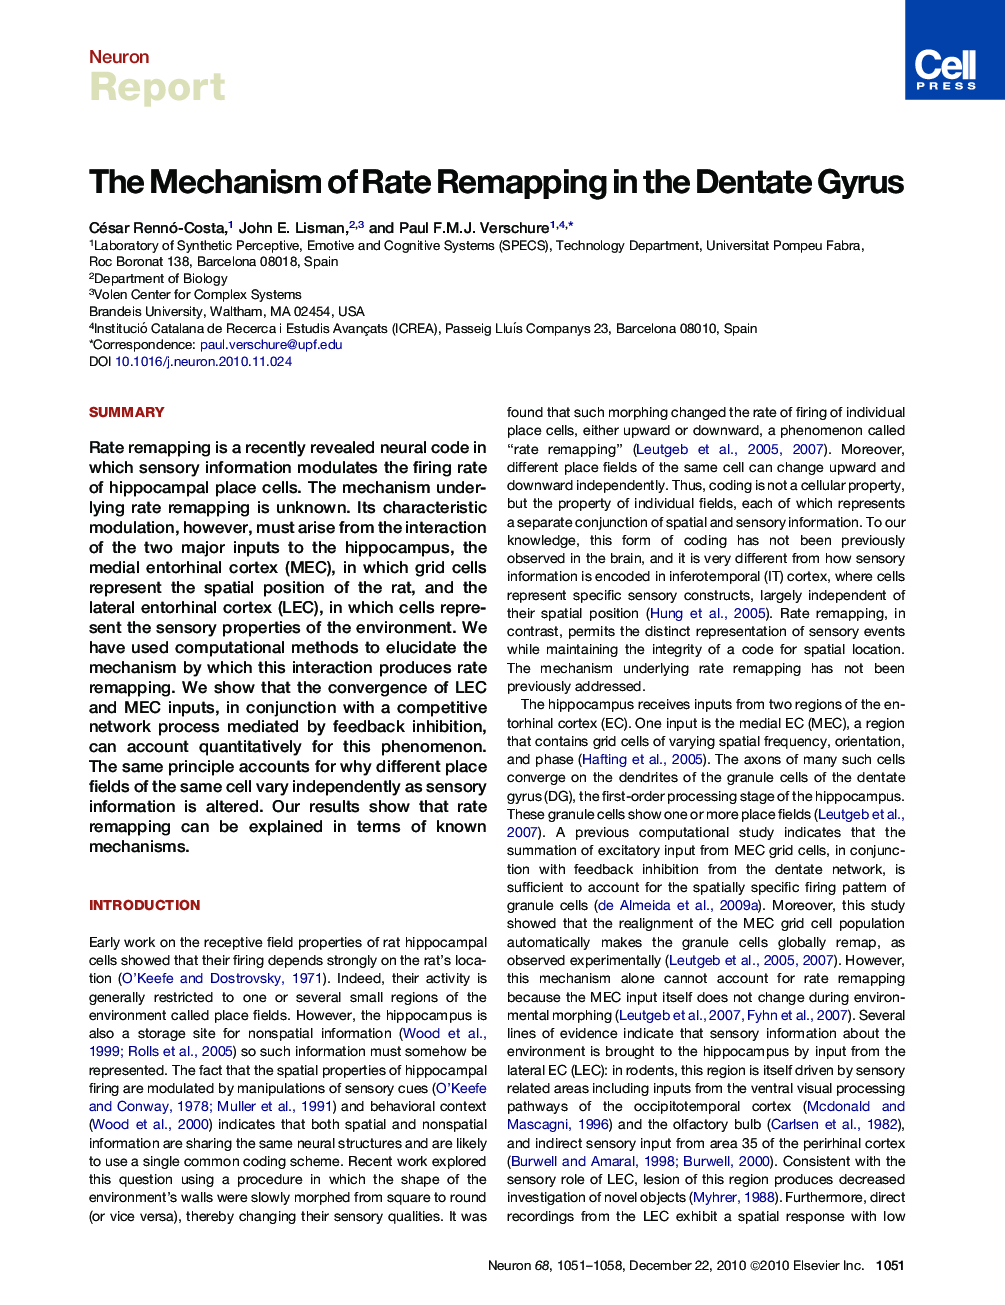 The Mechanism of Rate Remapping in the Dentate Gyrus